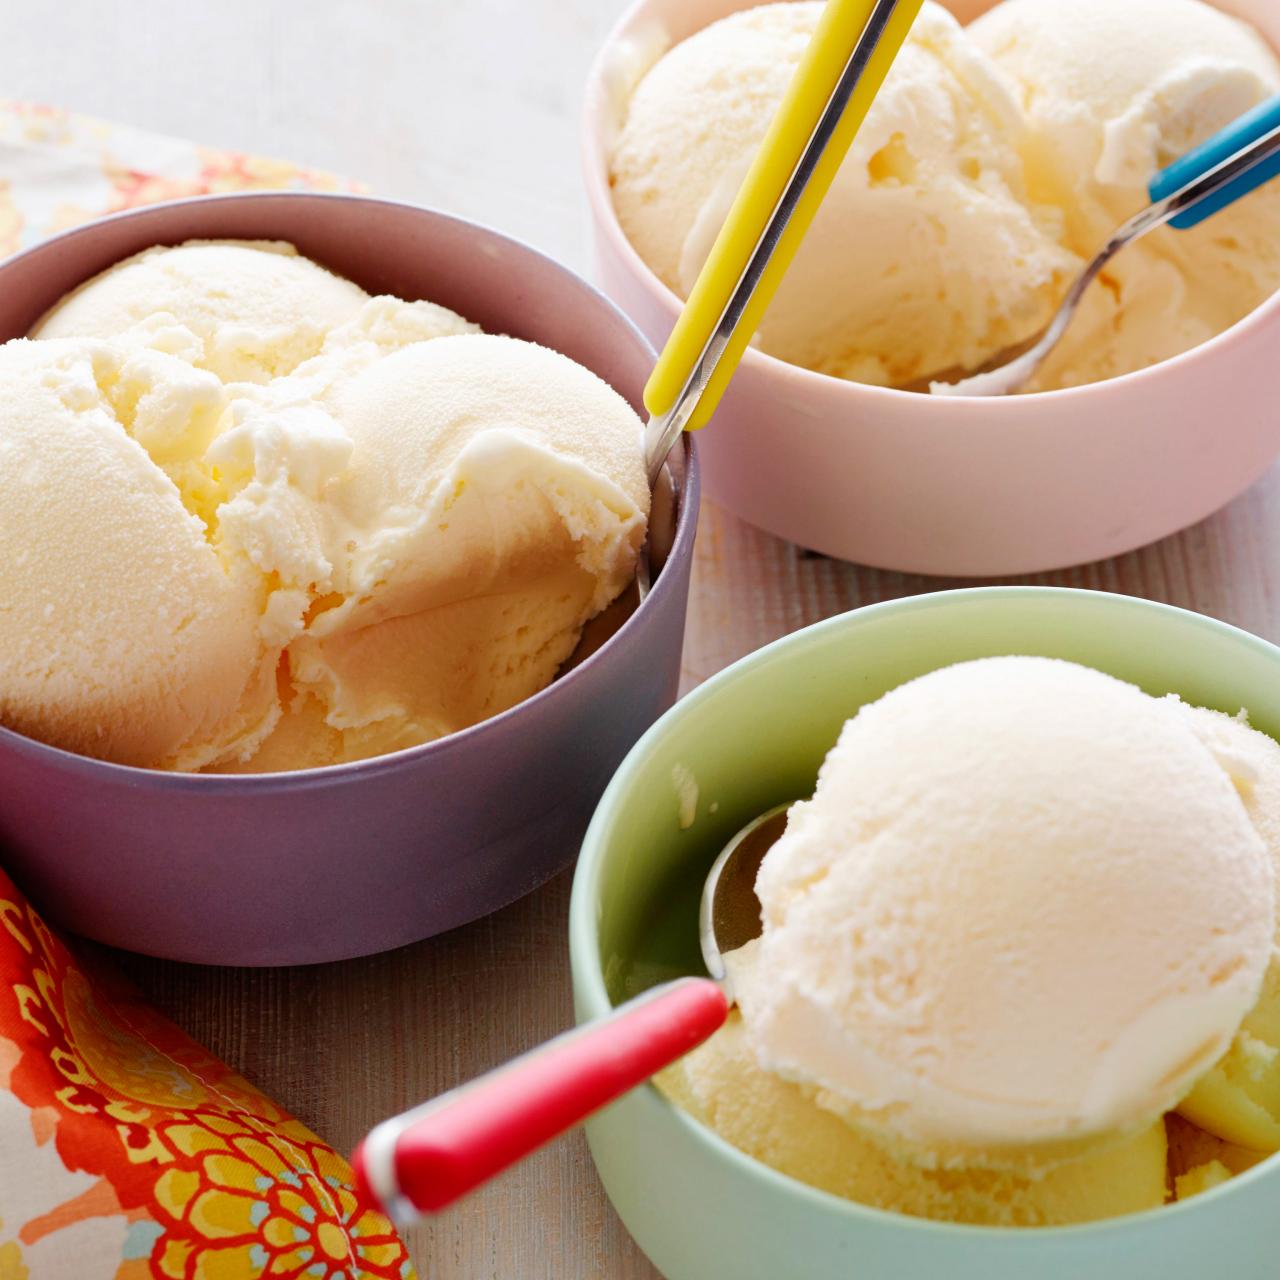 How To Make Homemade Ice Cream In An Electric Ice Cream Maker